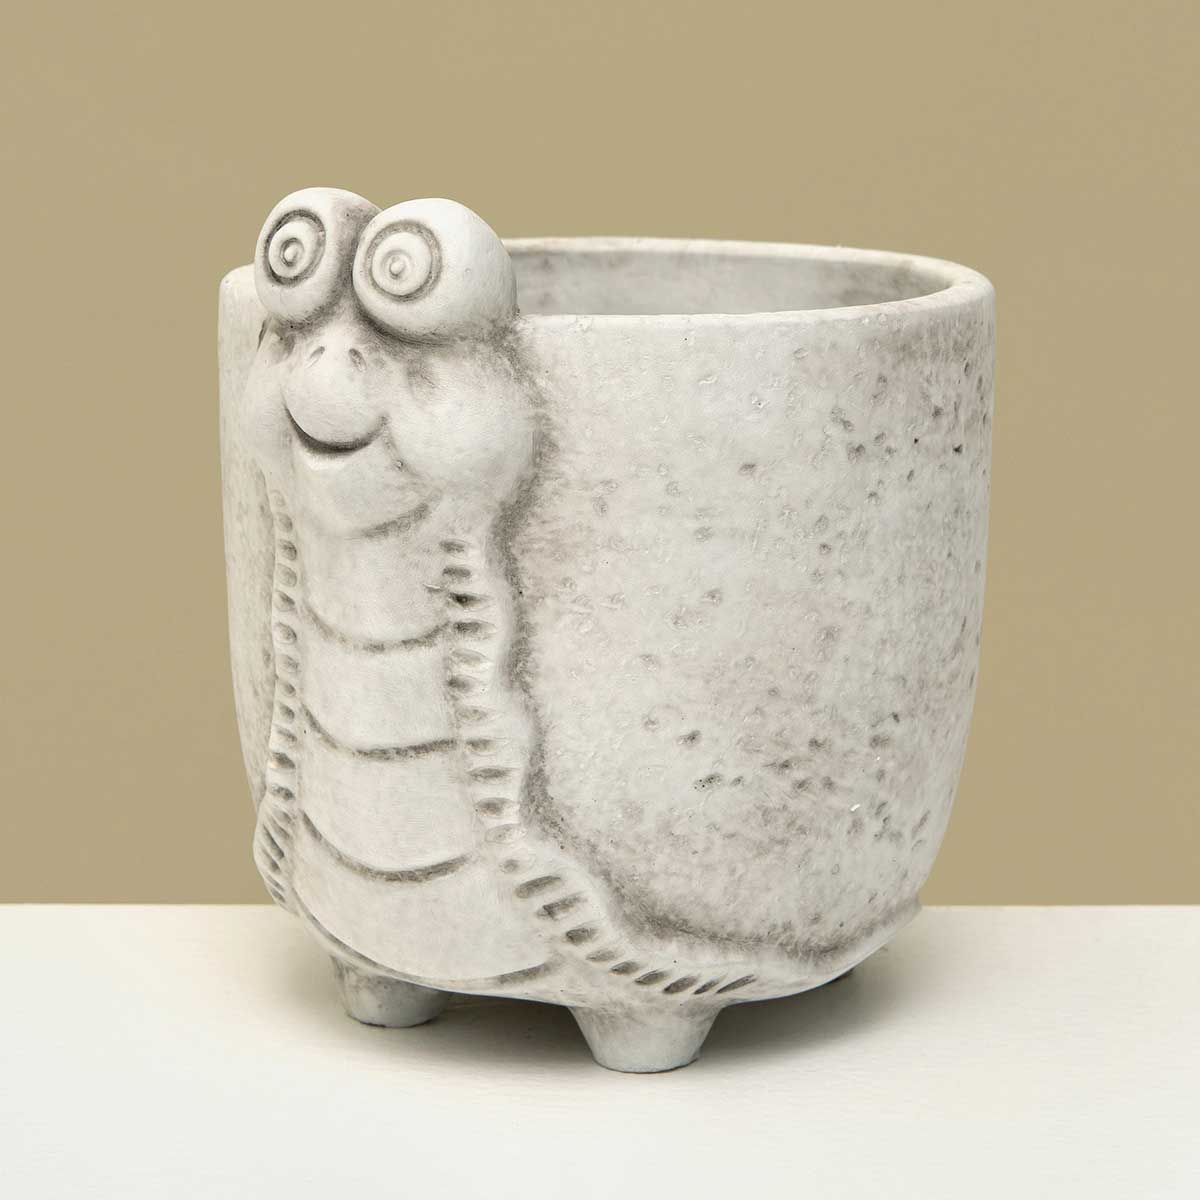 POT SNAIL 4.75IN X 4.5IN GREY WASH CONCRETE - Click Image to Close